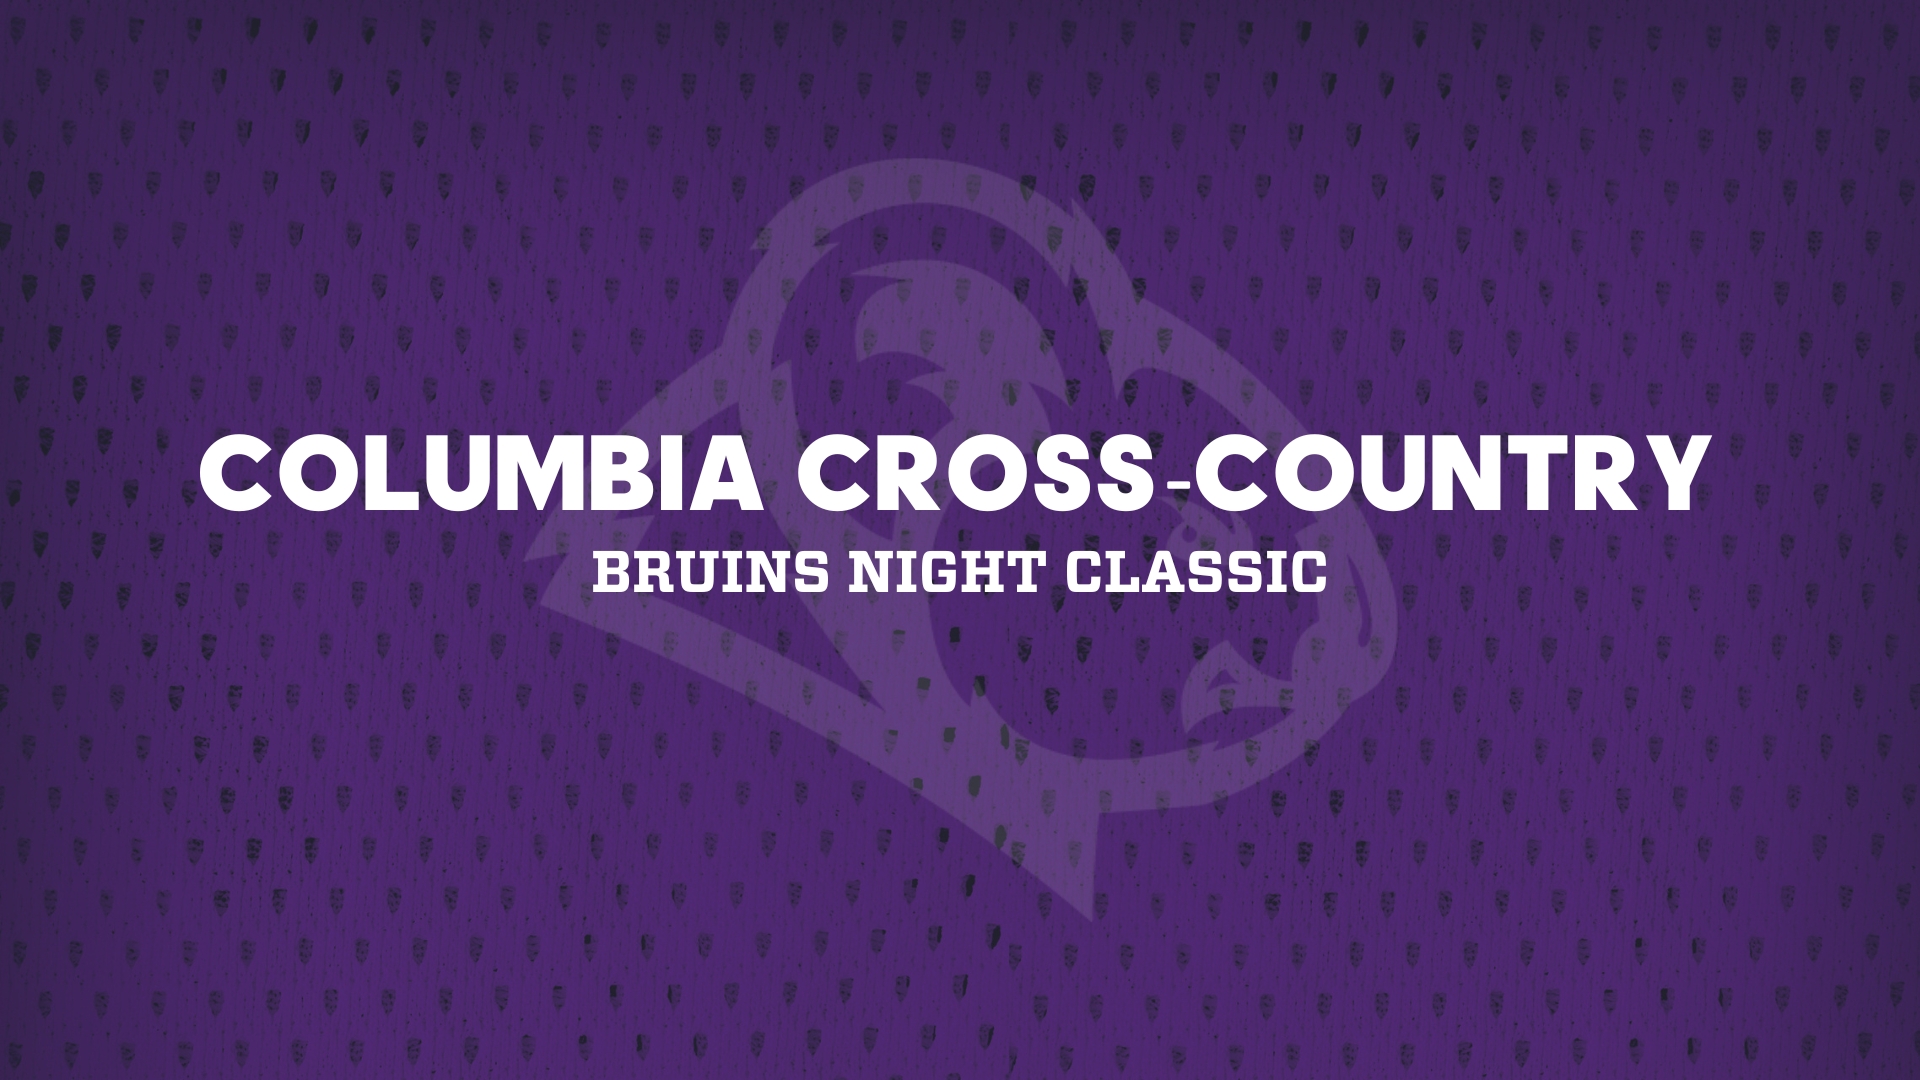 Women Take First at Bruins Night Classic, Men Place Second